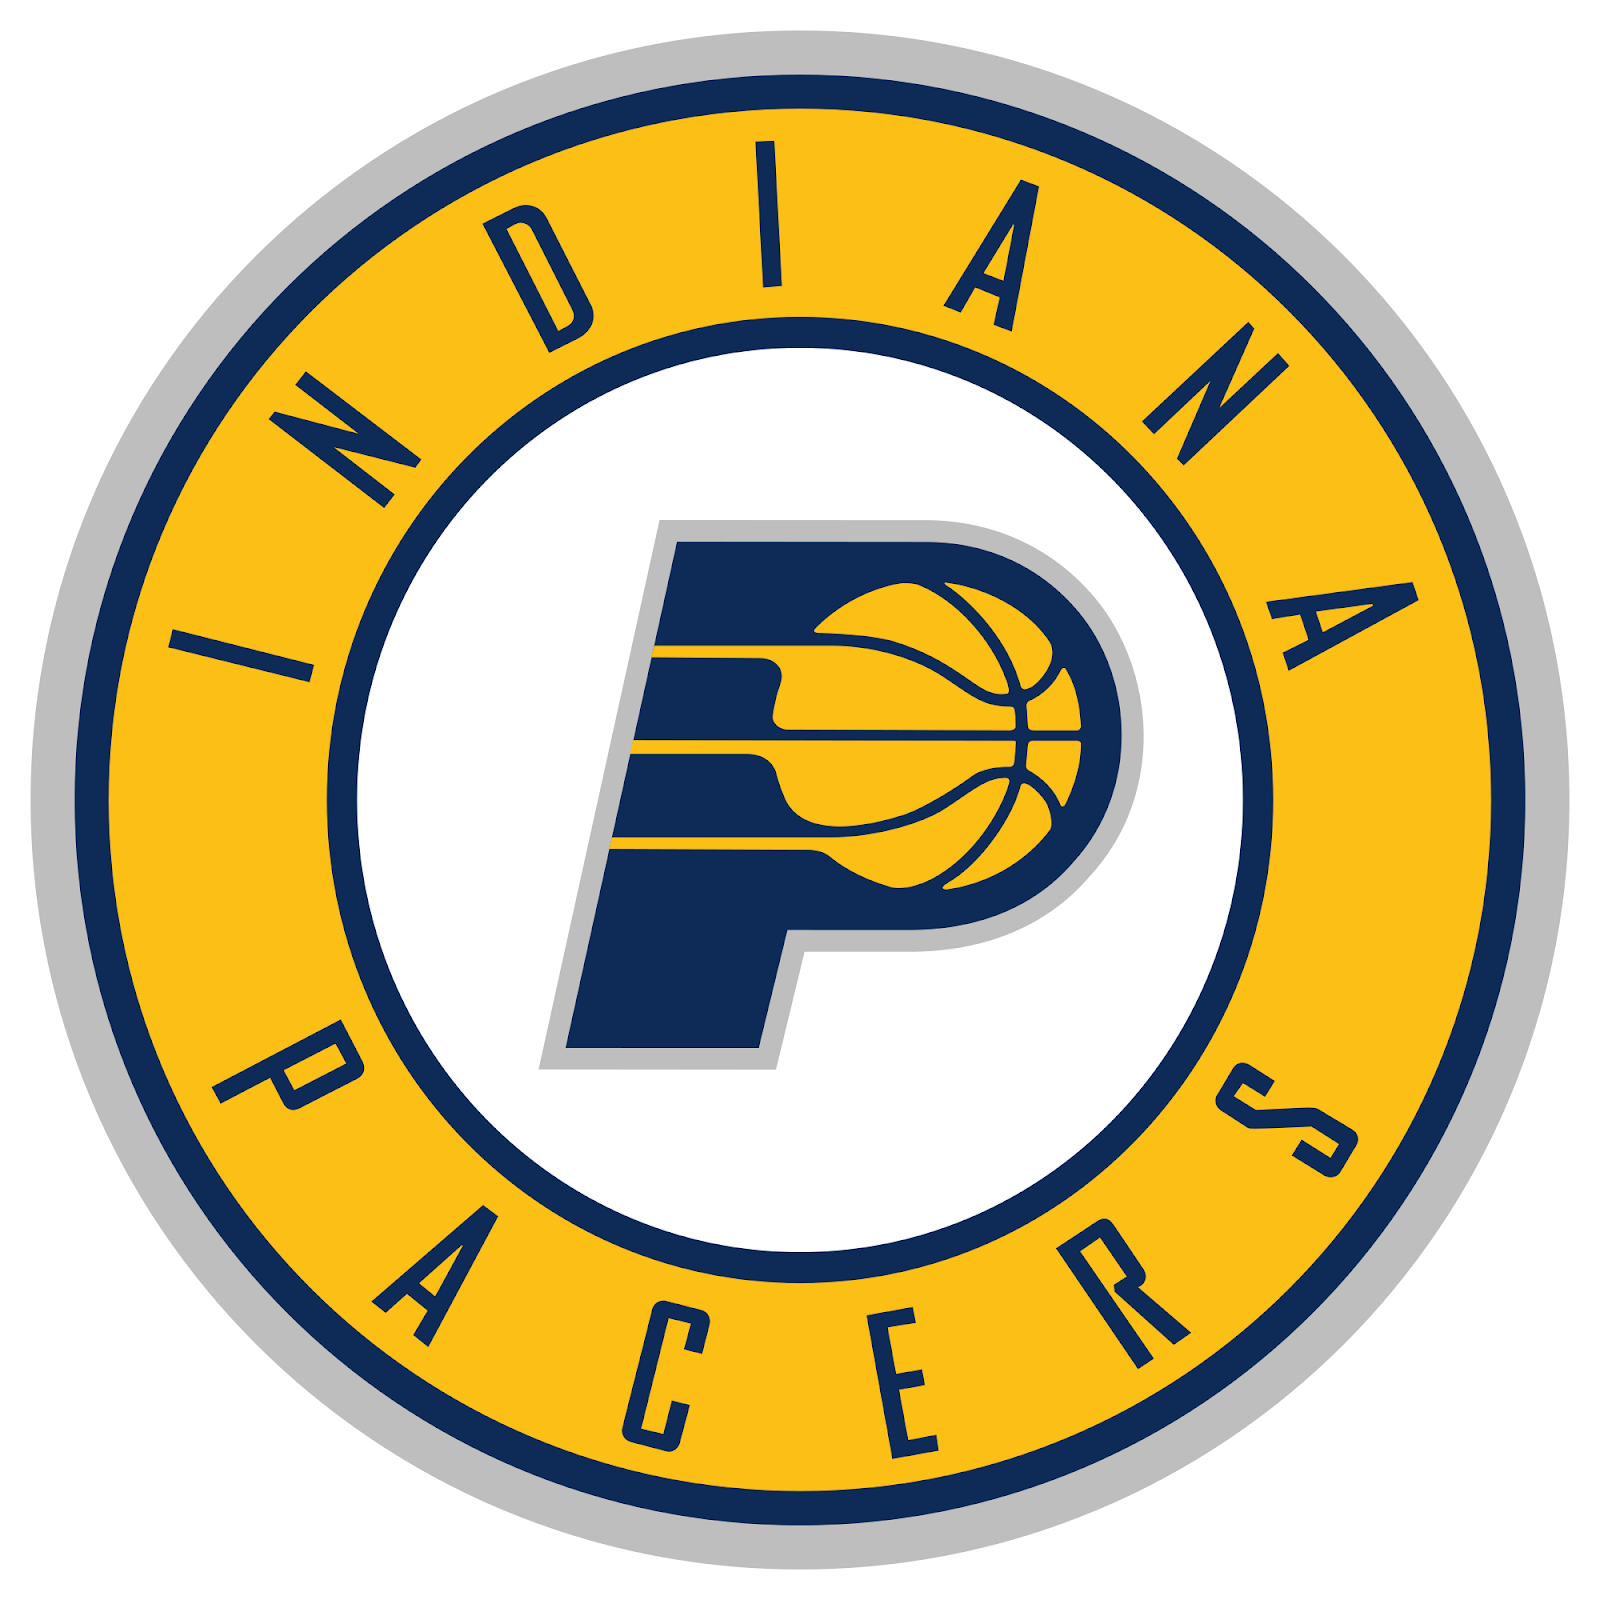 https://upload.wikimedia.org/wikipedia/commons/thumb/9/97/Indiana_Pacers_logo.svg/2000px-Indiana_Pacers_logo.svg.png